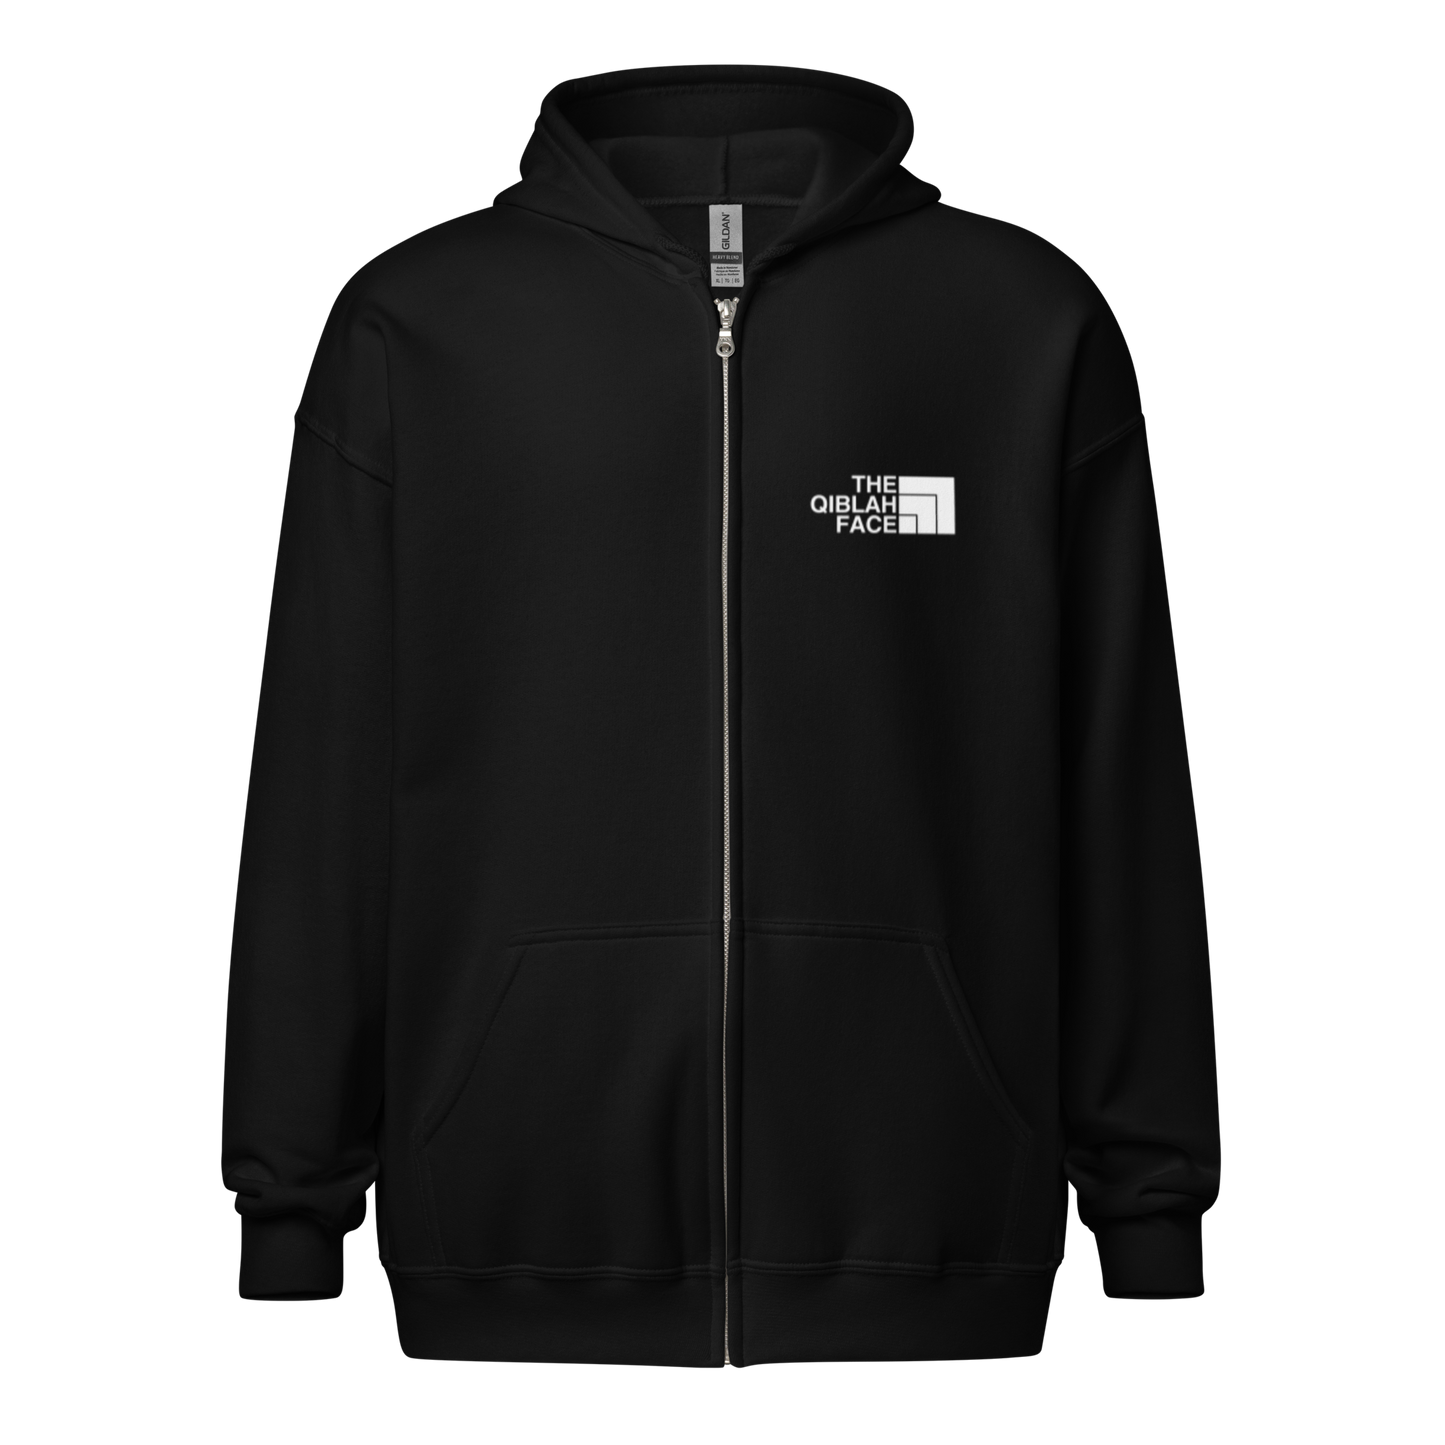 HOODIE Zip Heavy Blend (Adult) - THE QIBLAH FACE (Never Stop Praying - Back Logo) - White